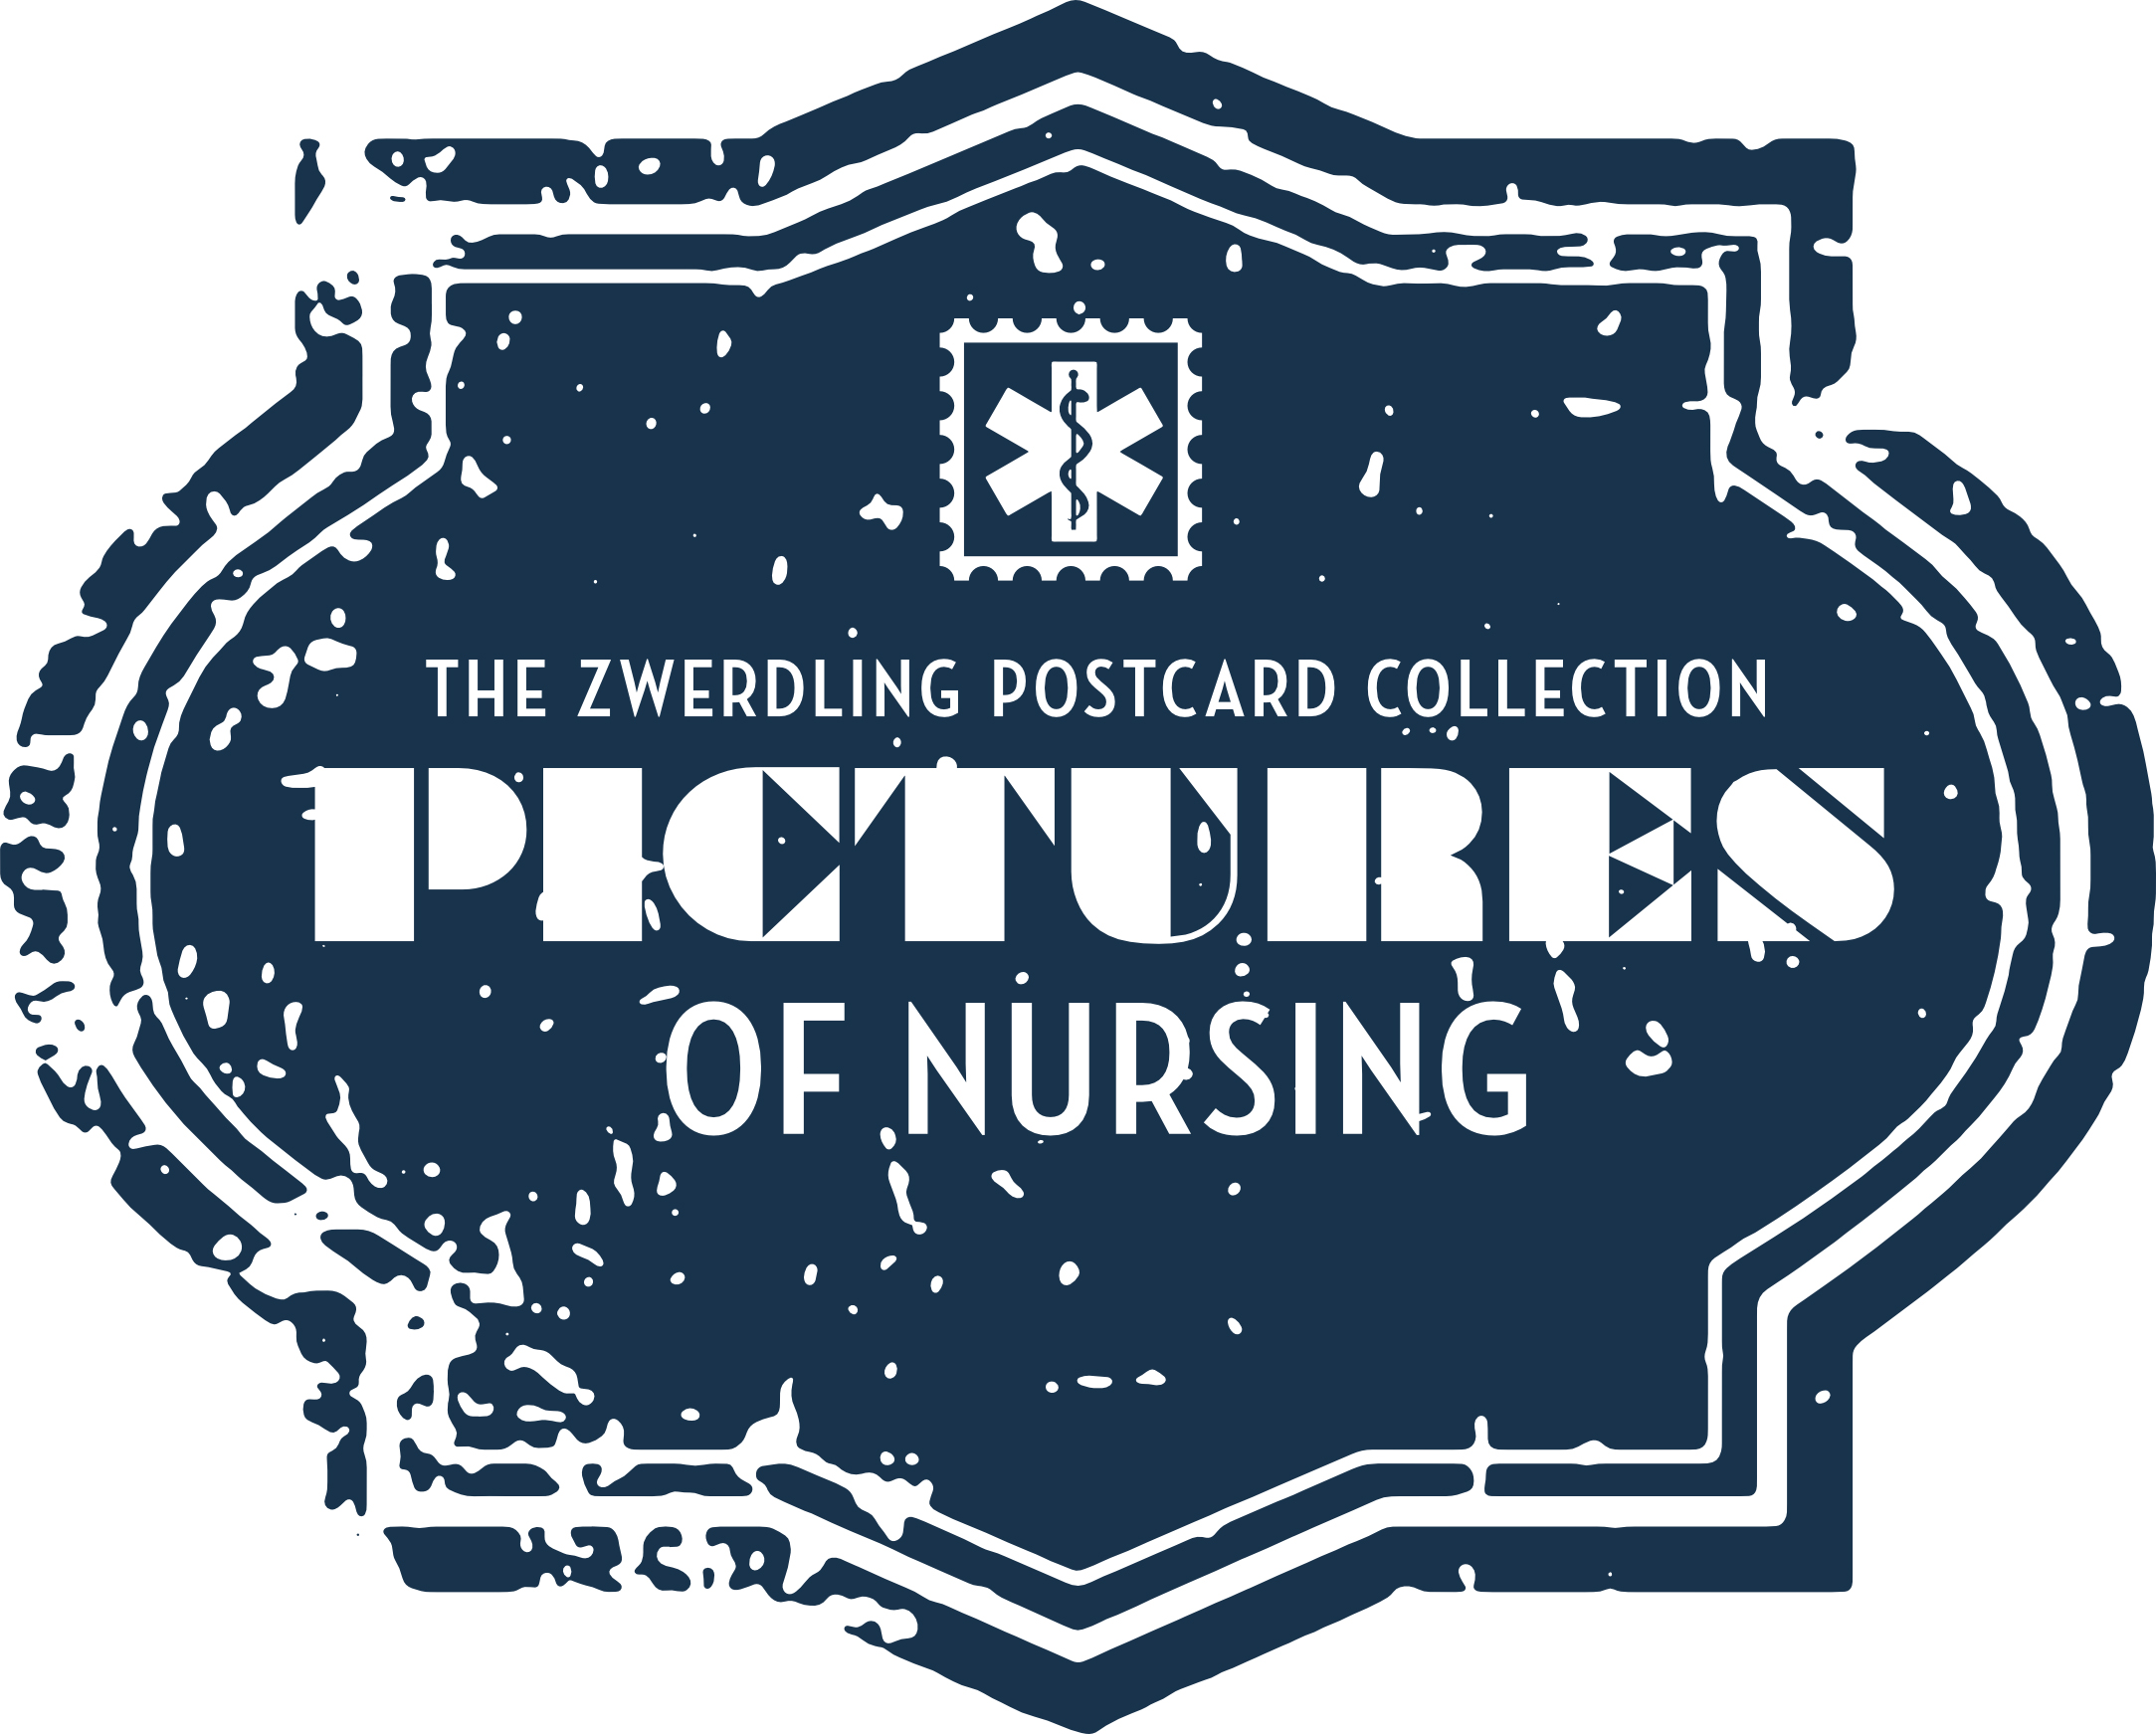 The logo of the National Library of Medicine traveling exhibit "Pictures of Nursing: The Zwerdling Postcard Collection